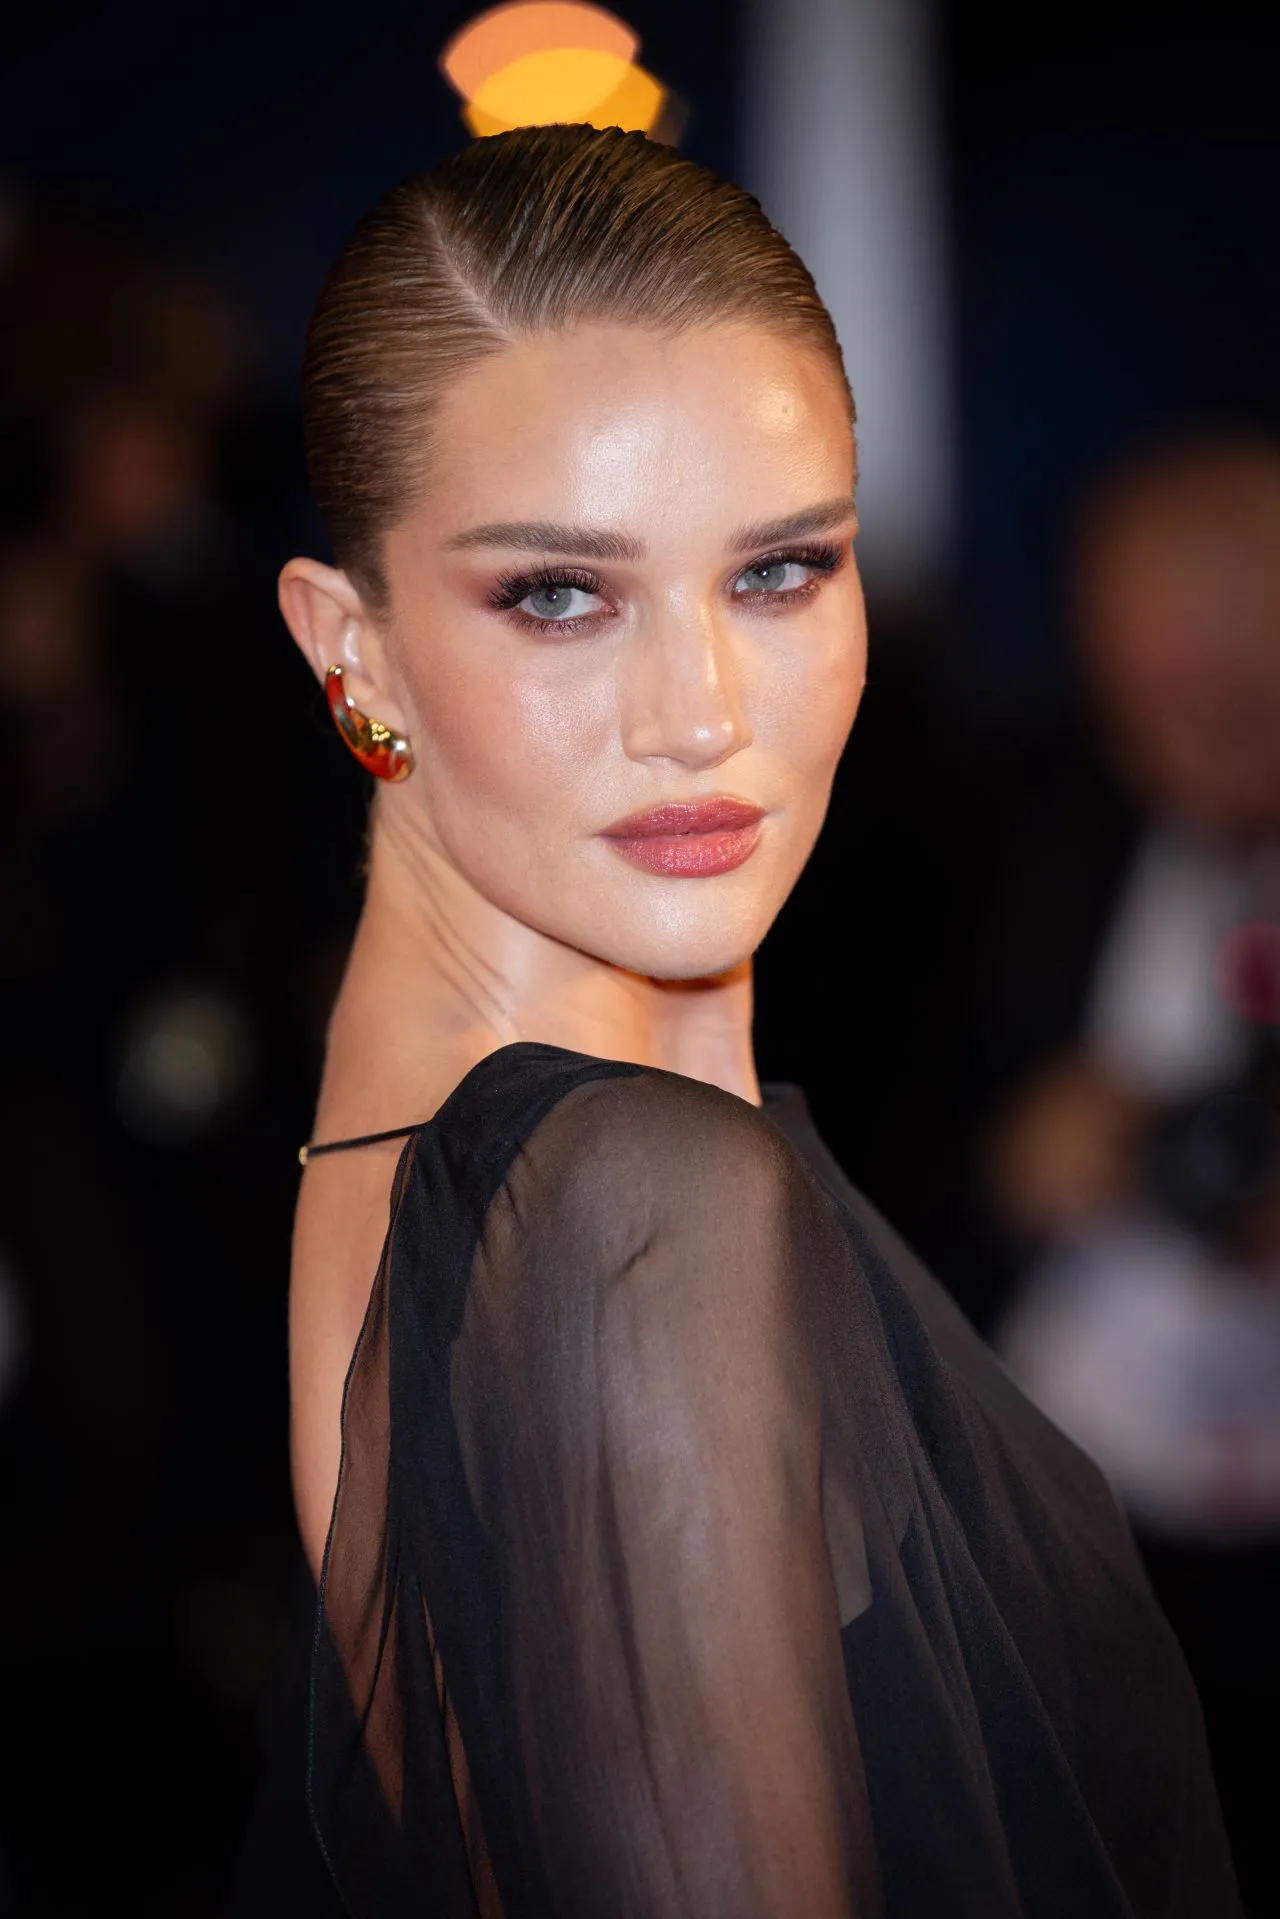 ROSIE HUNTINGTON WHITELEY AT THE SHROUDS PREMIERE AT CANNES FILM FESTIVAL